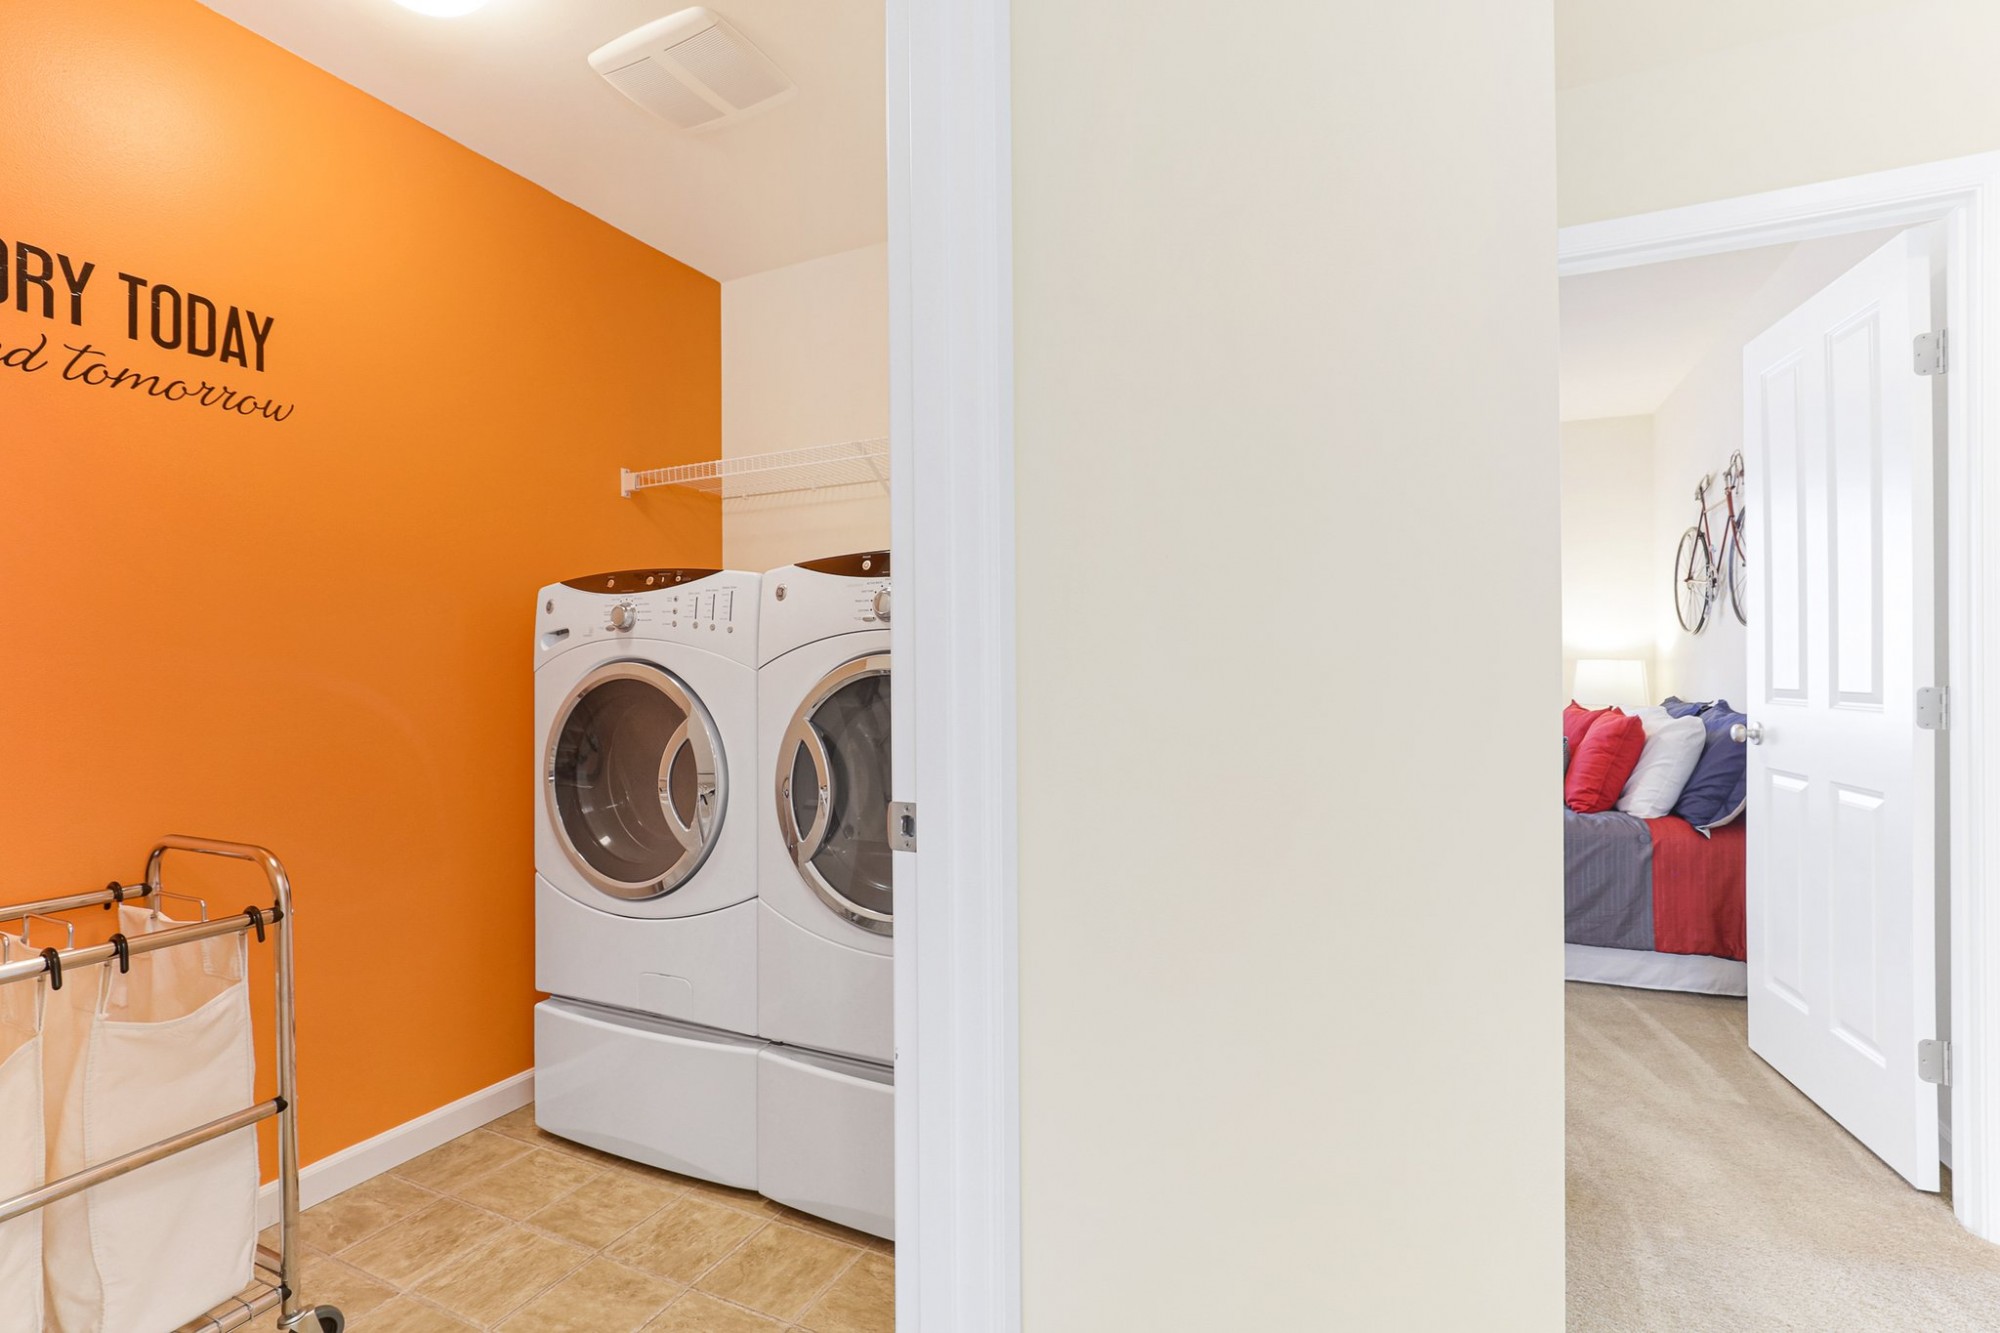 Upper-Level Laundry Room. Washer and Dryer is included.